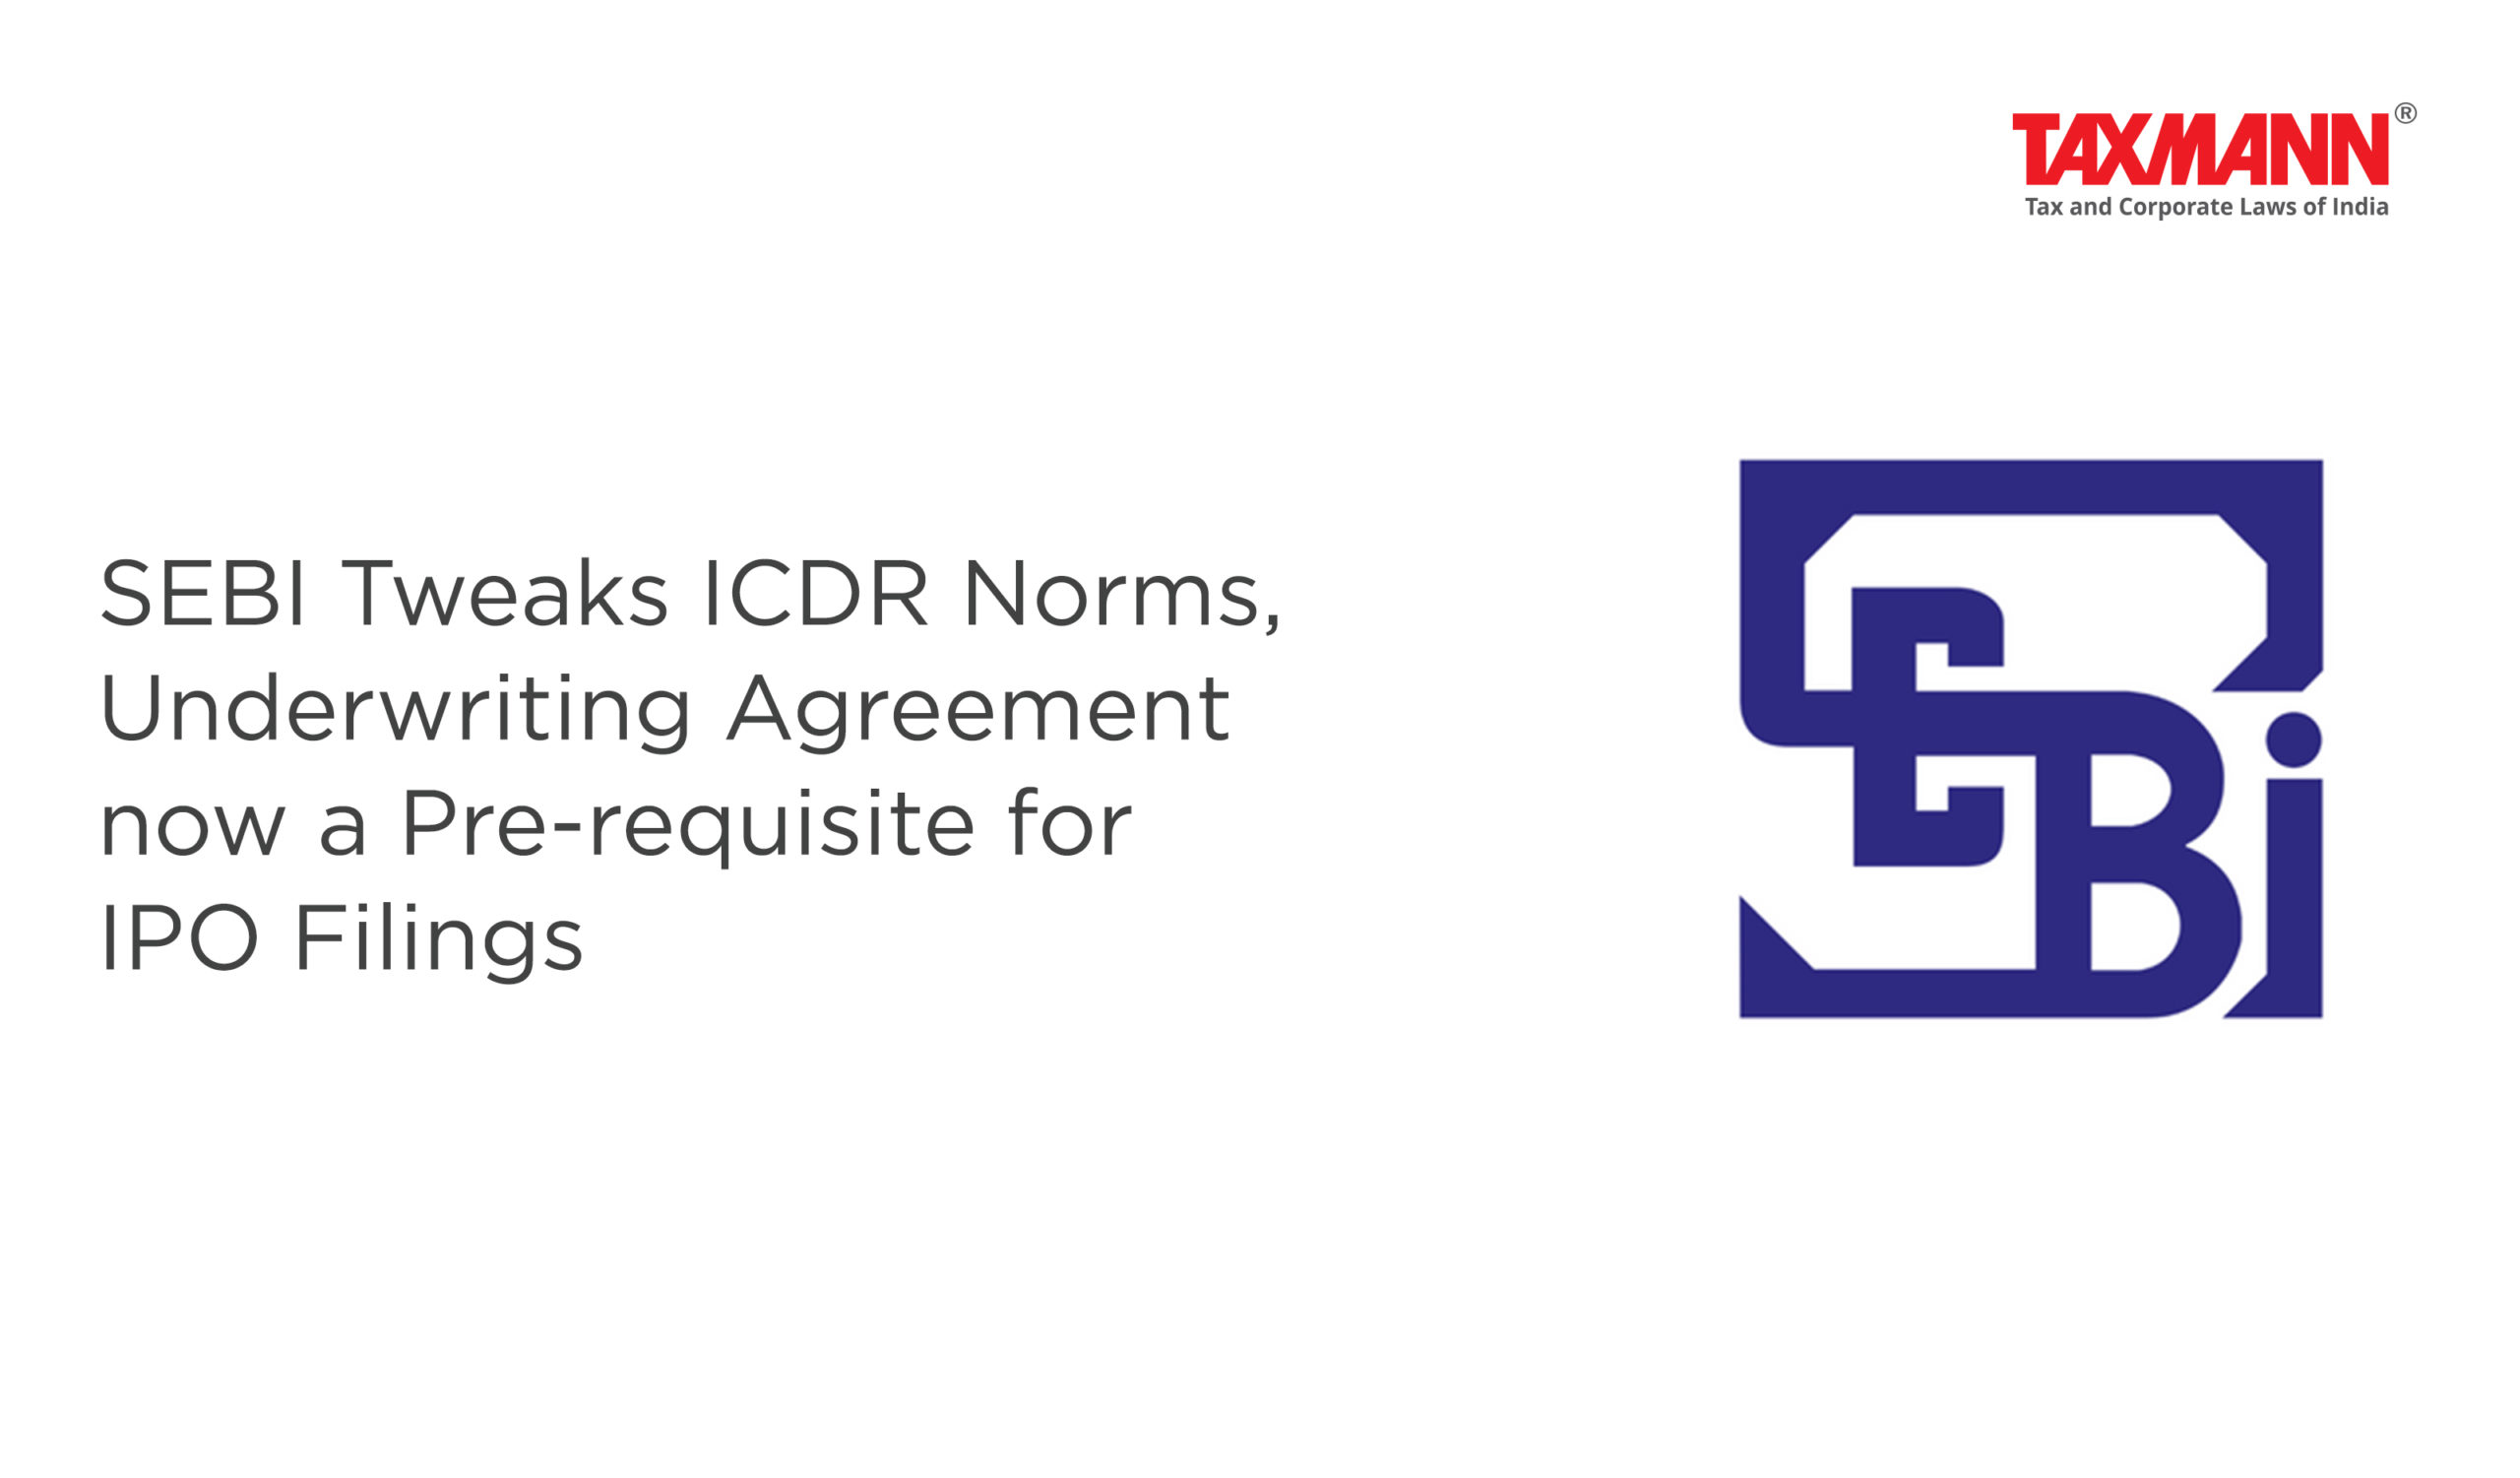 ICDR Norms for IPO Filings